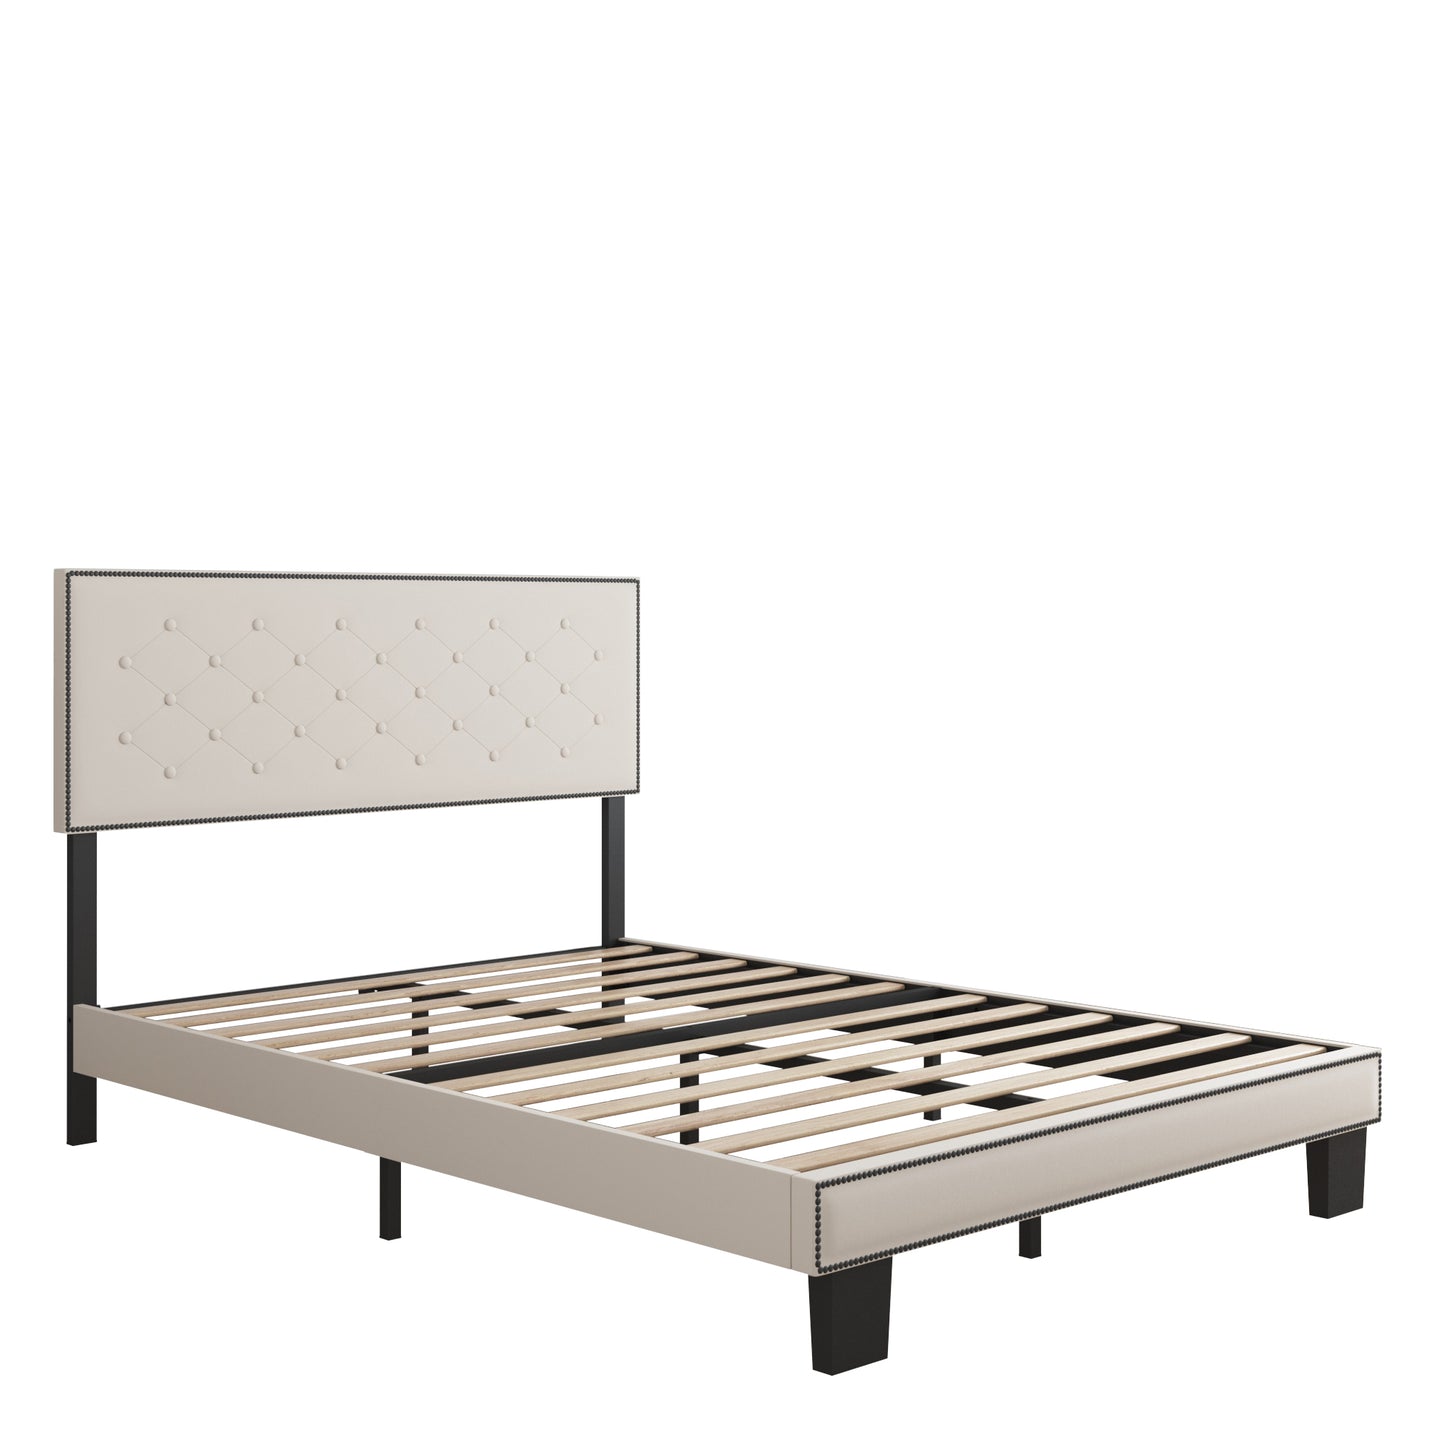 SYNGAR Upholstered Full Platform Bed Frame Height Adjustable, Full Size Storage Bed with Button Tufted Headboard, Metal Mattress Foundation with Strong Slats, No Box Spring Needed, Beige